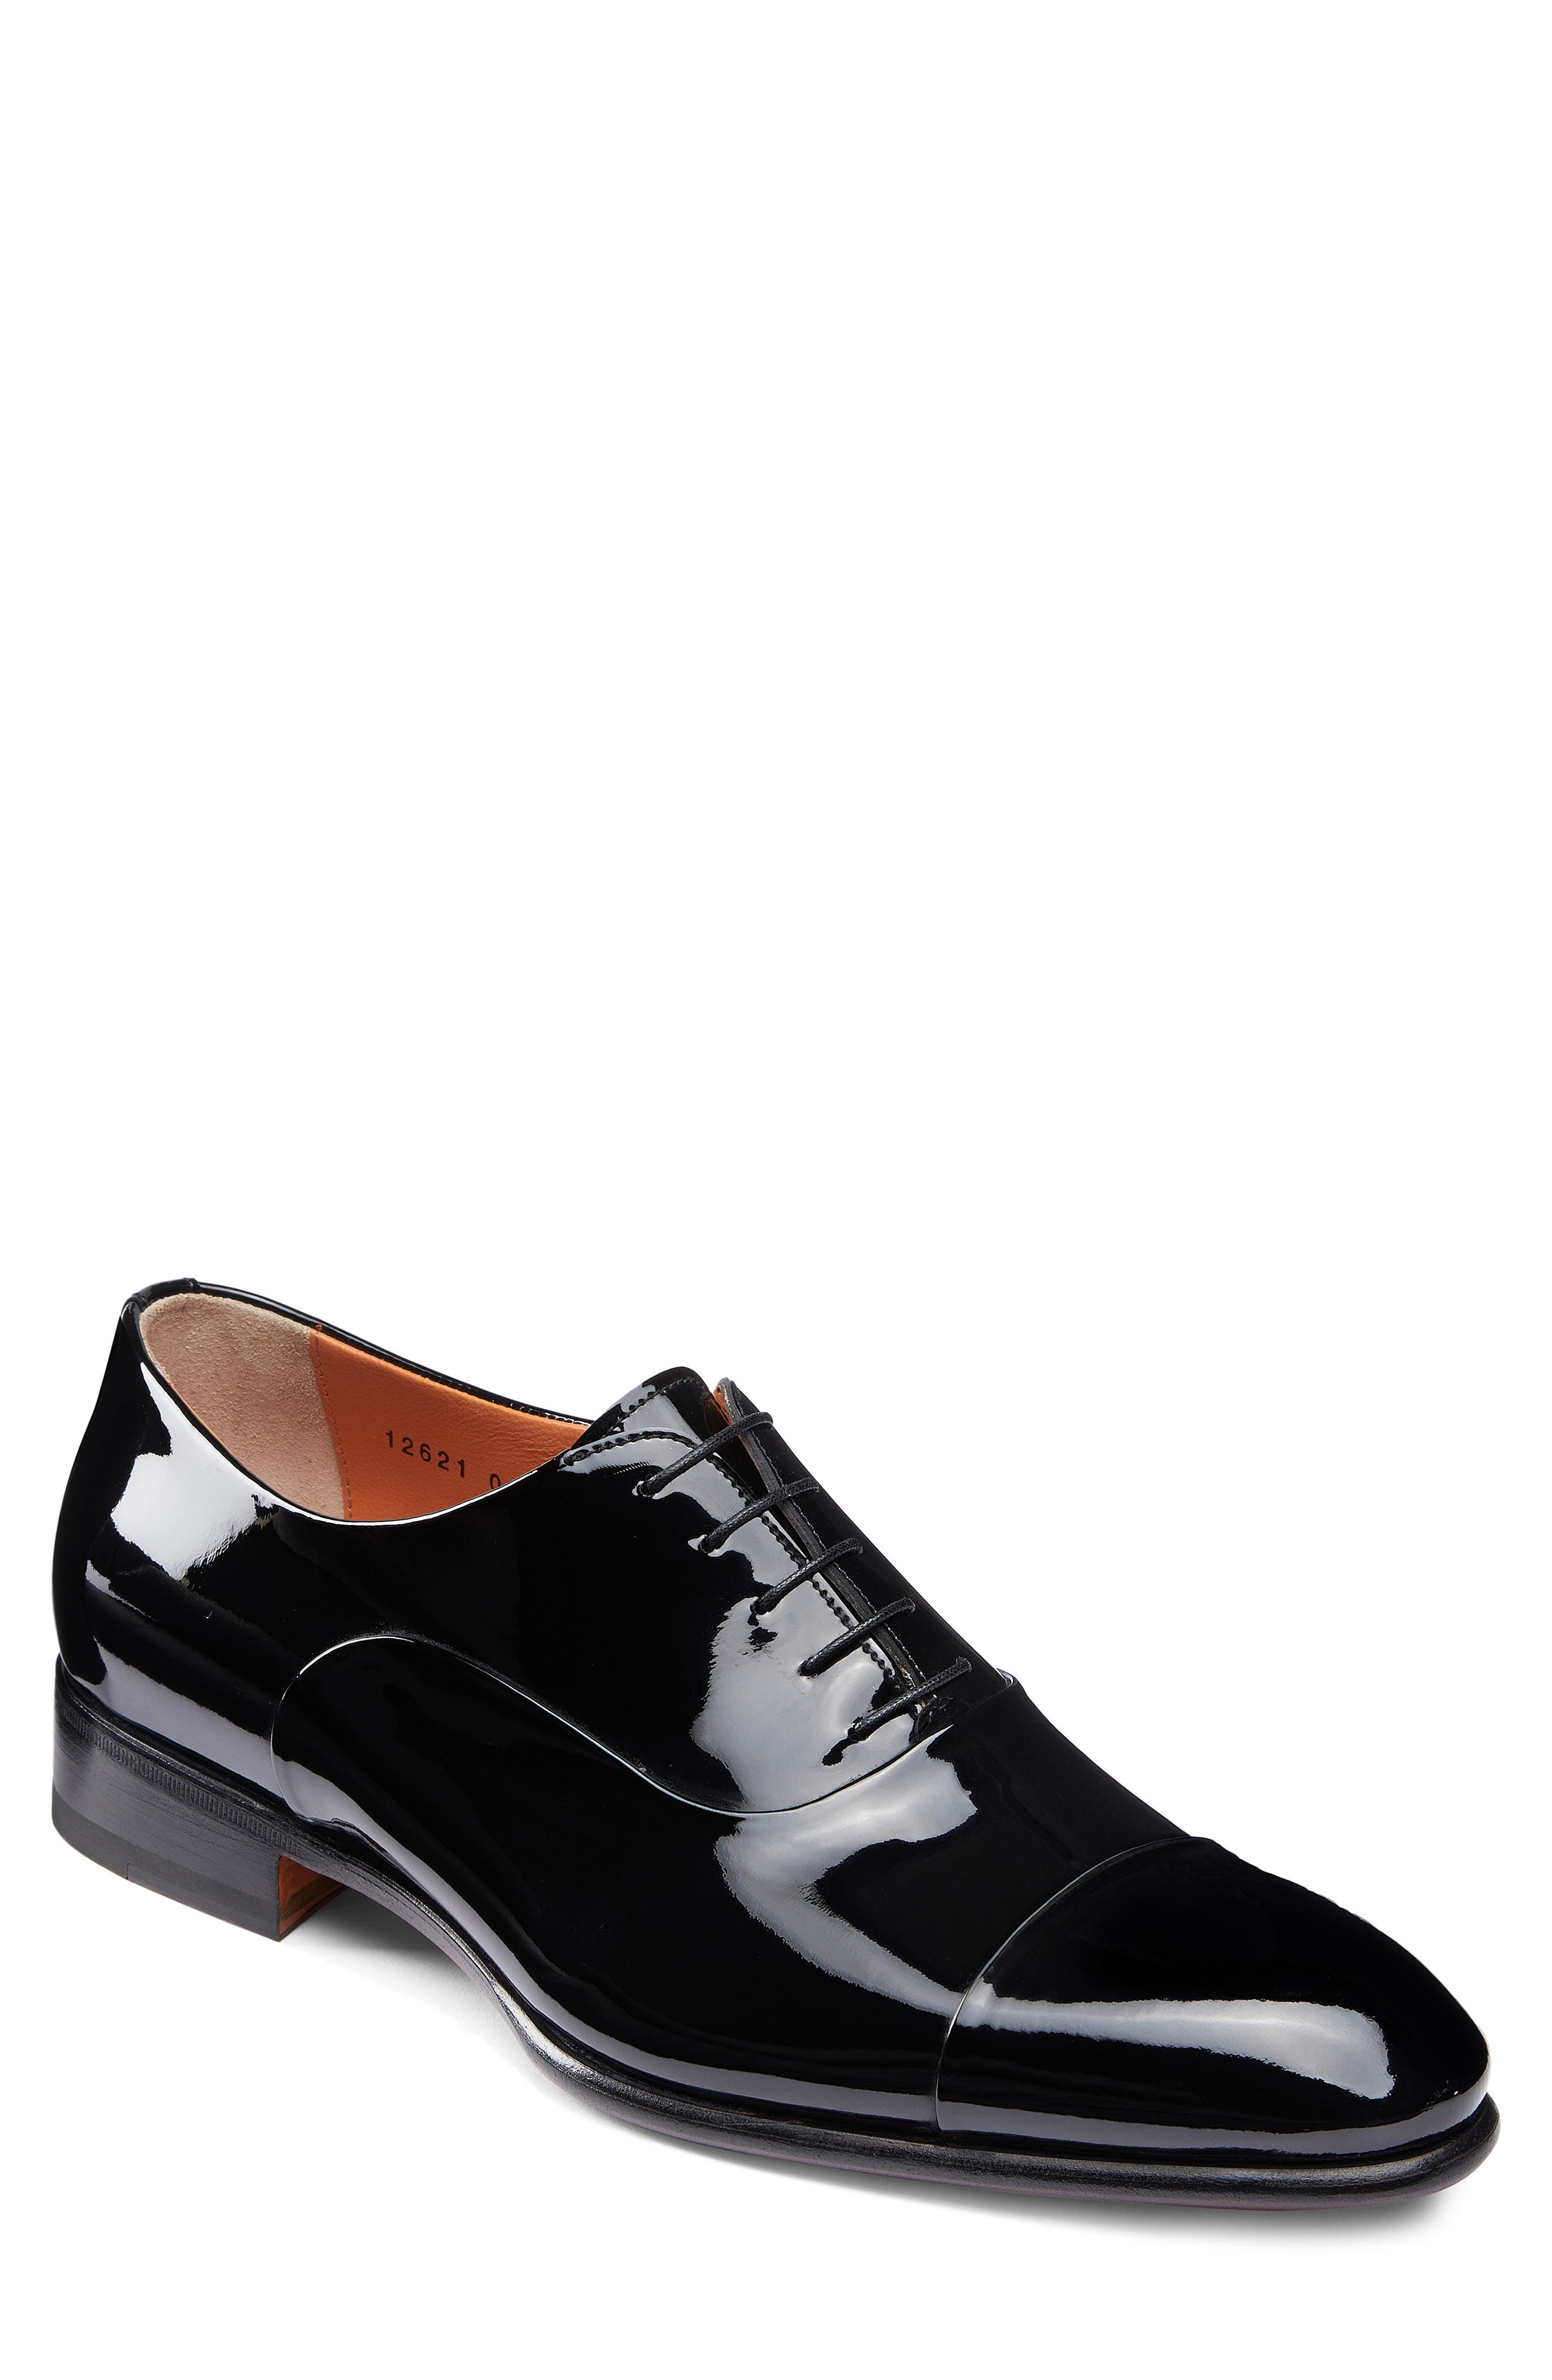 formal shoes for tuxedo